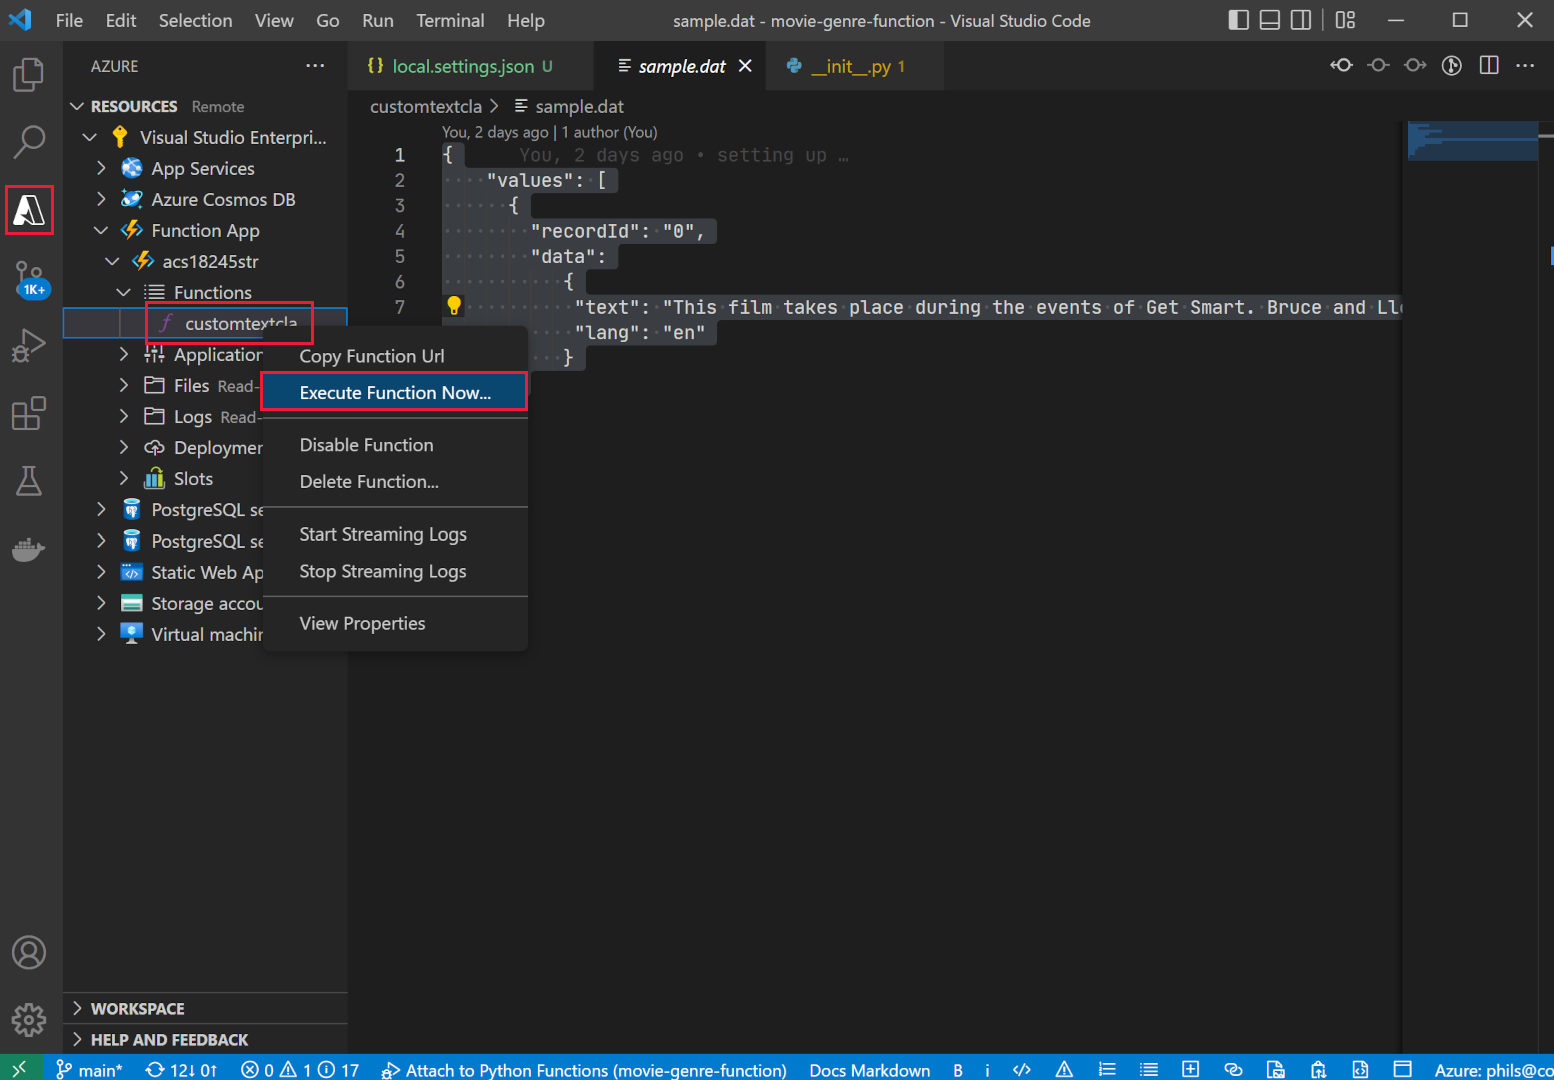 A screenshot showing how to execute a remote function app from inside Visual Studio Code.